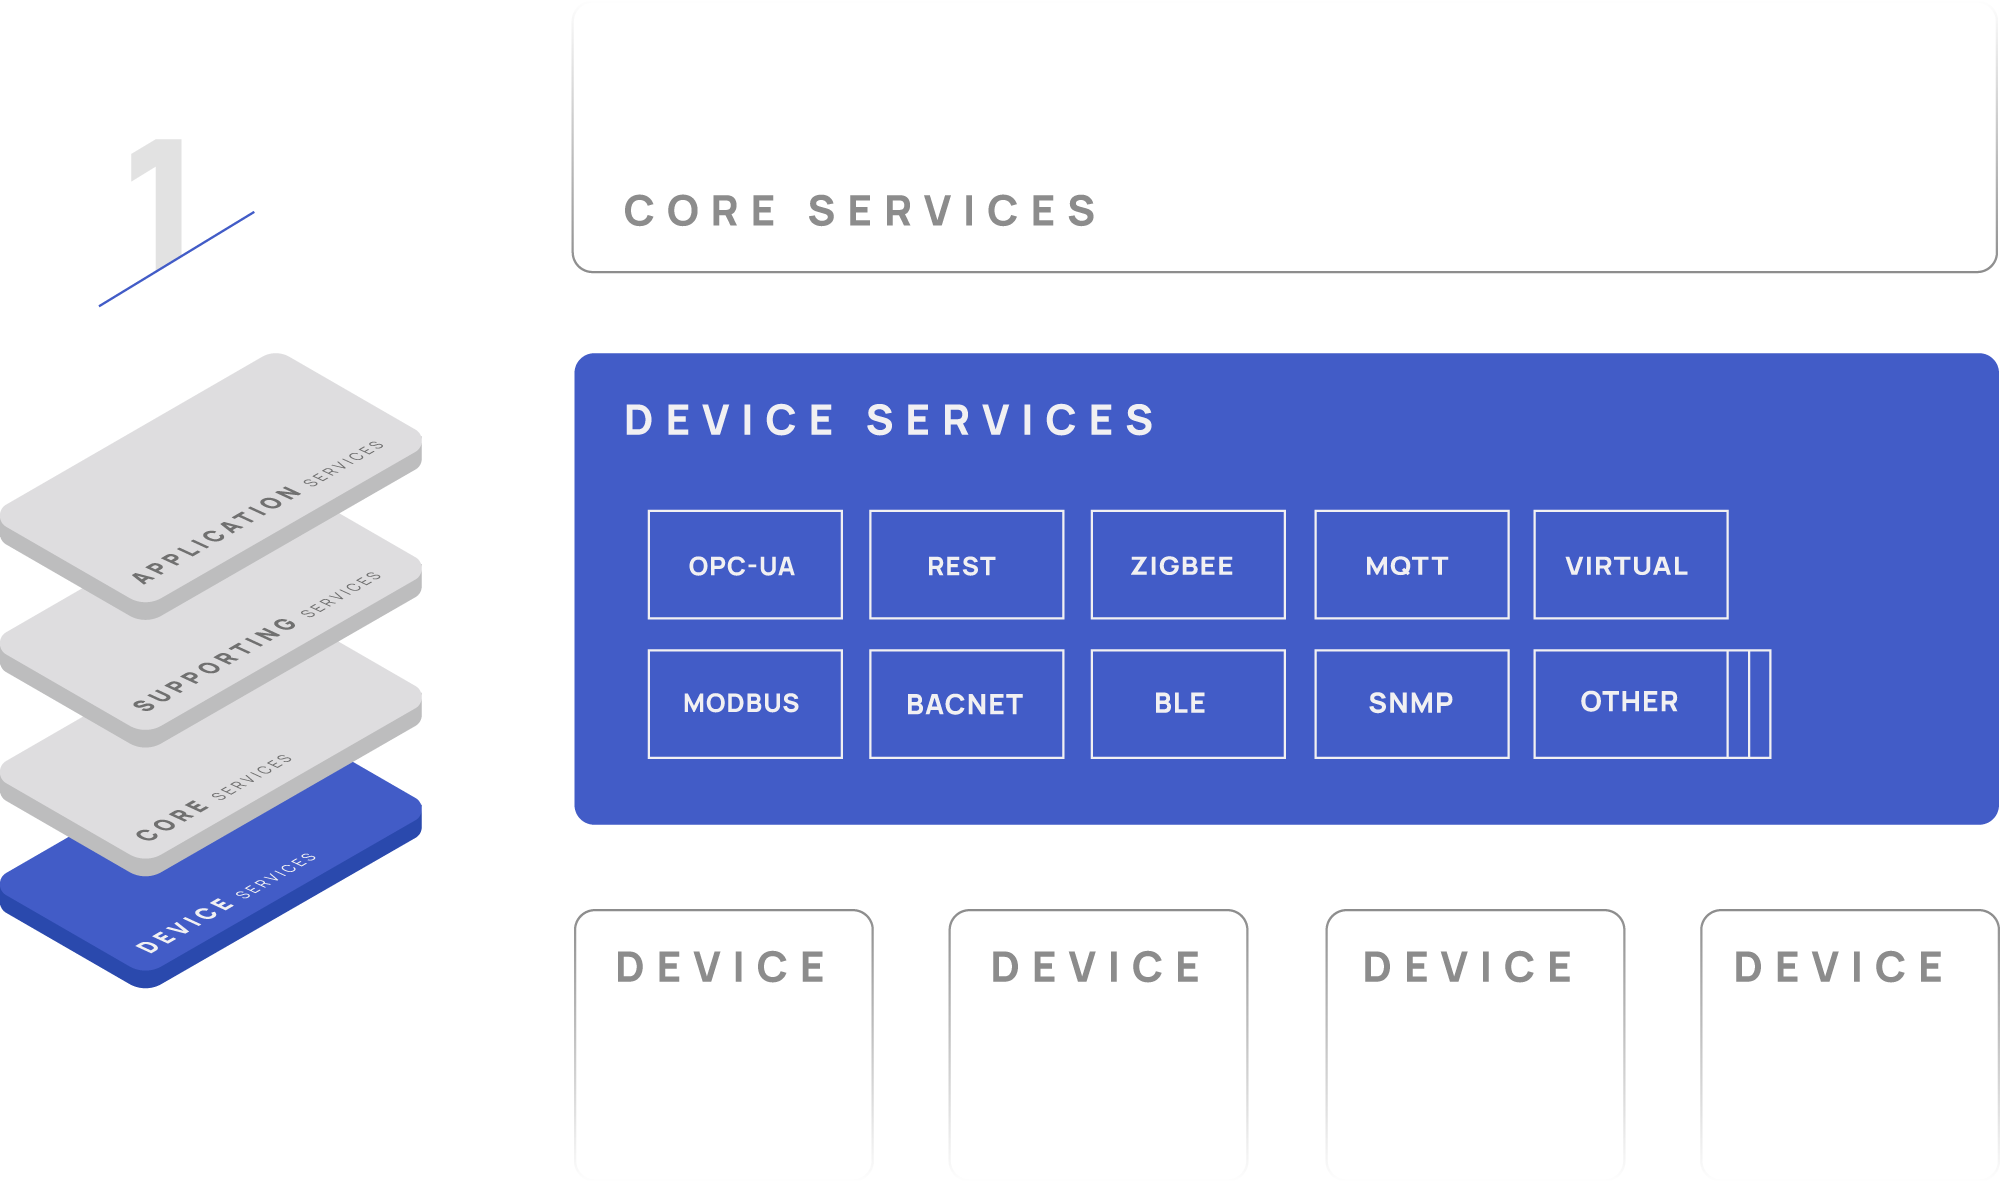 Device Services